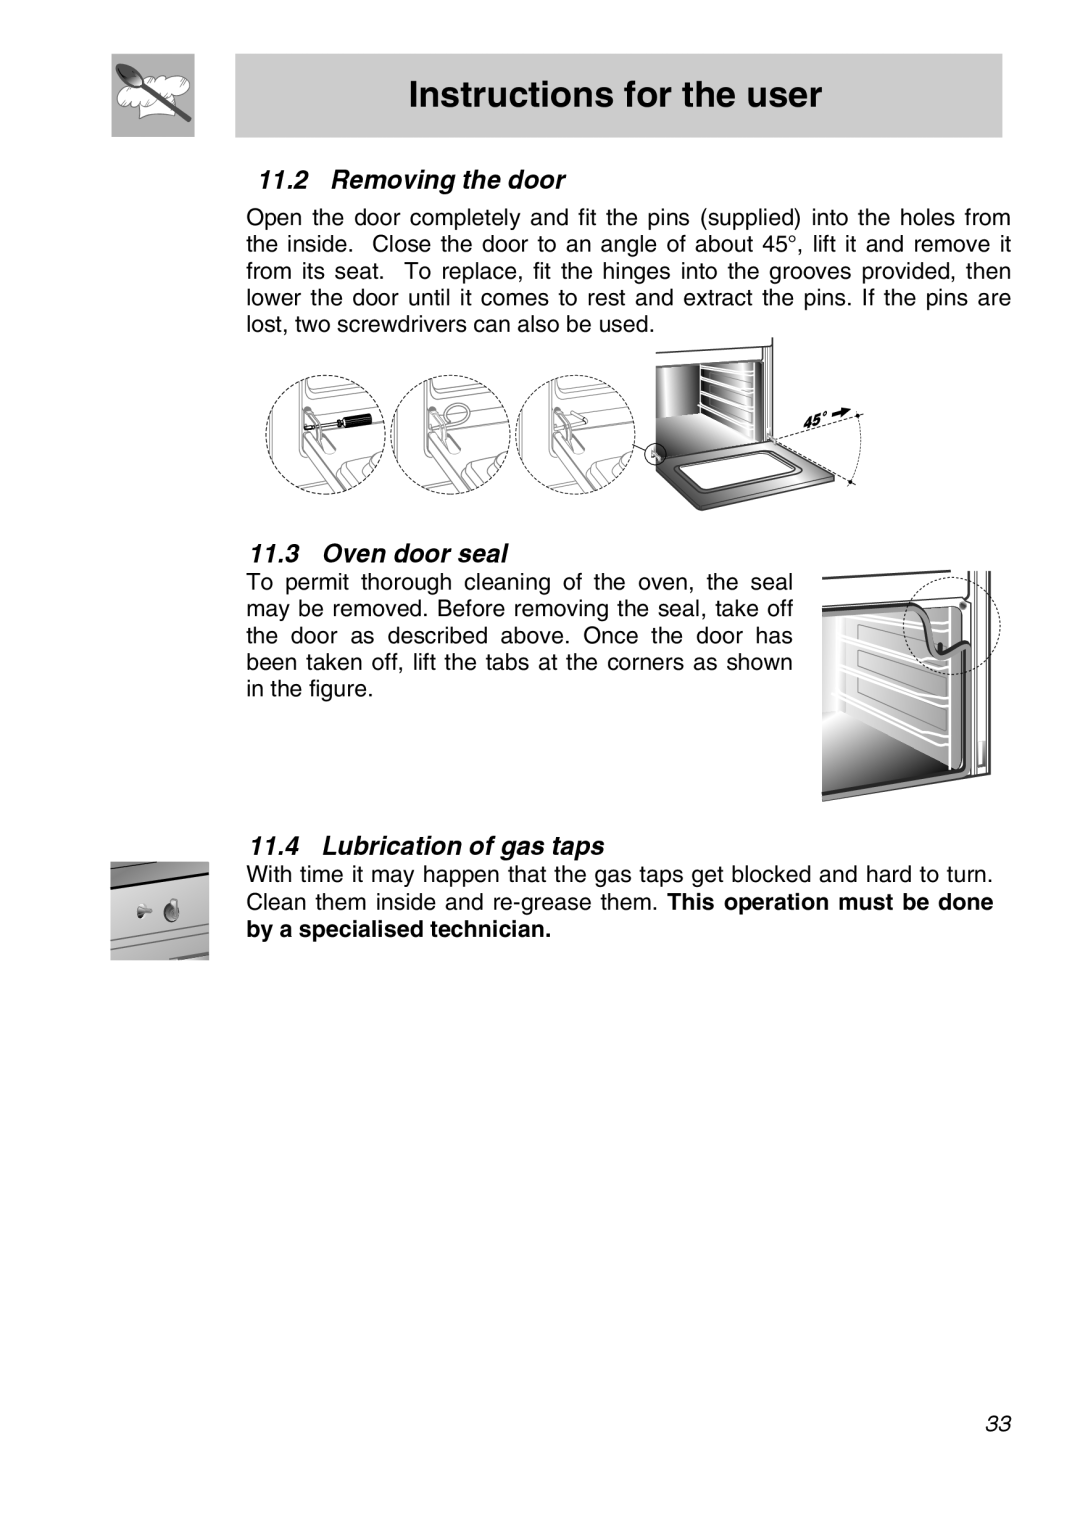 Smeg A11A-6 manual Instructions for the user, Removing the door, Oven door seal, Lubrication of gas taps 